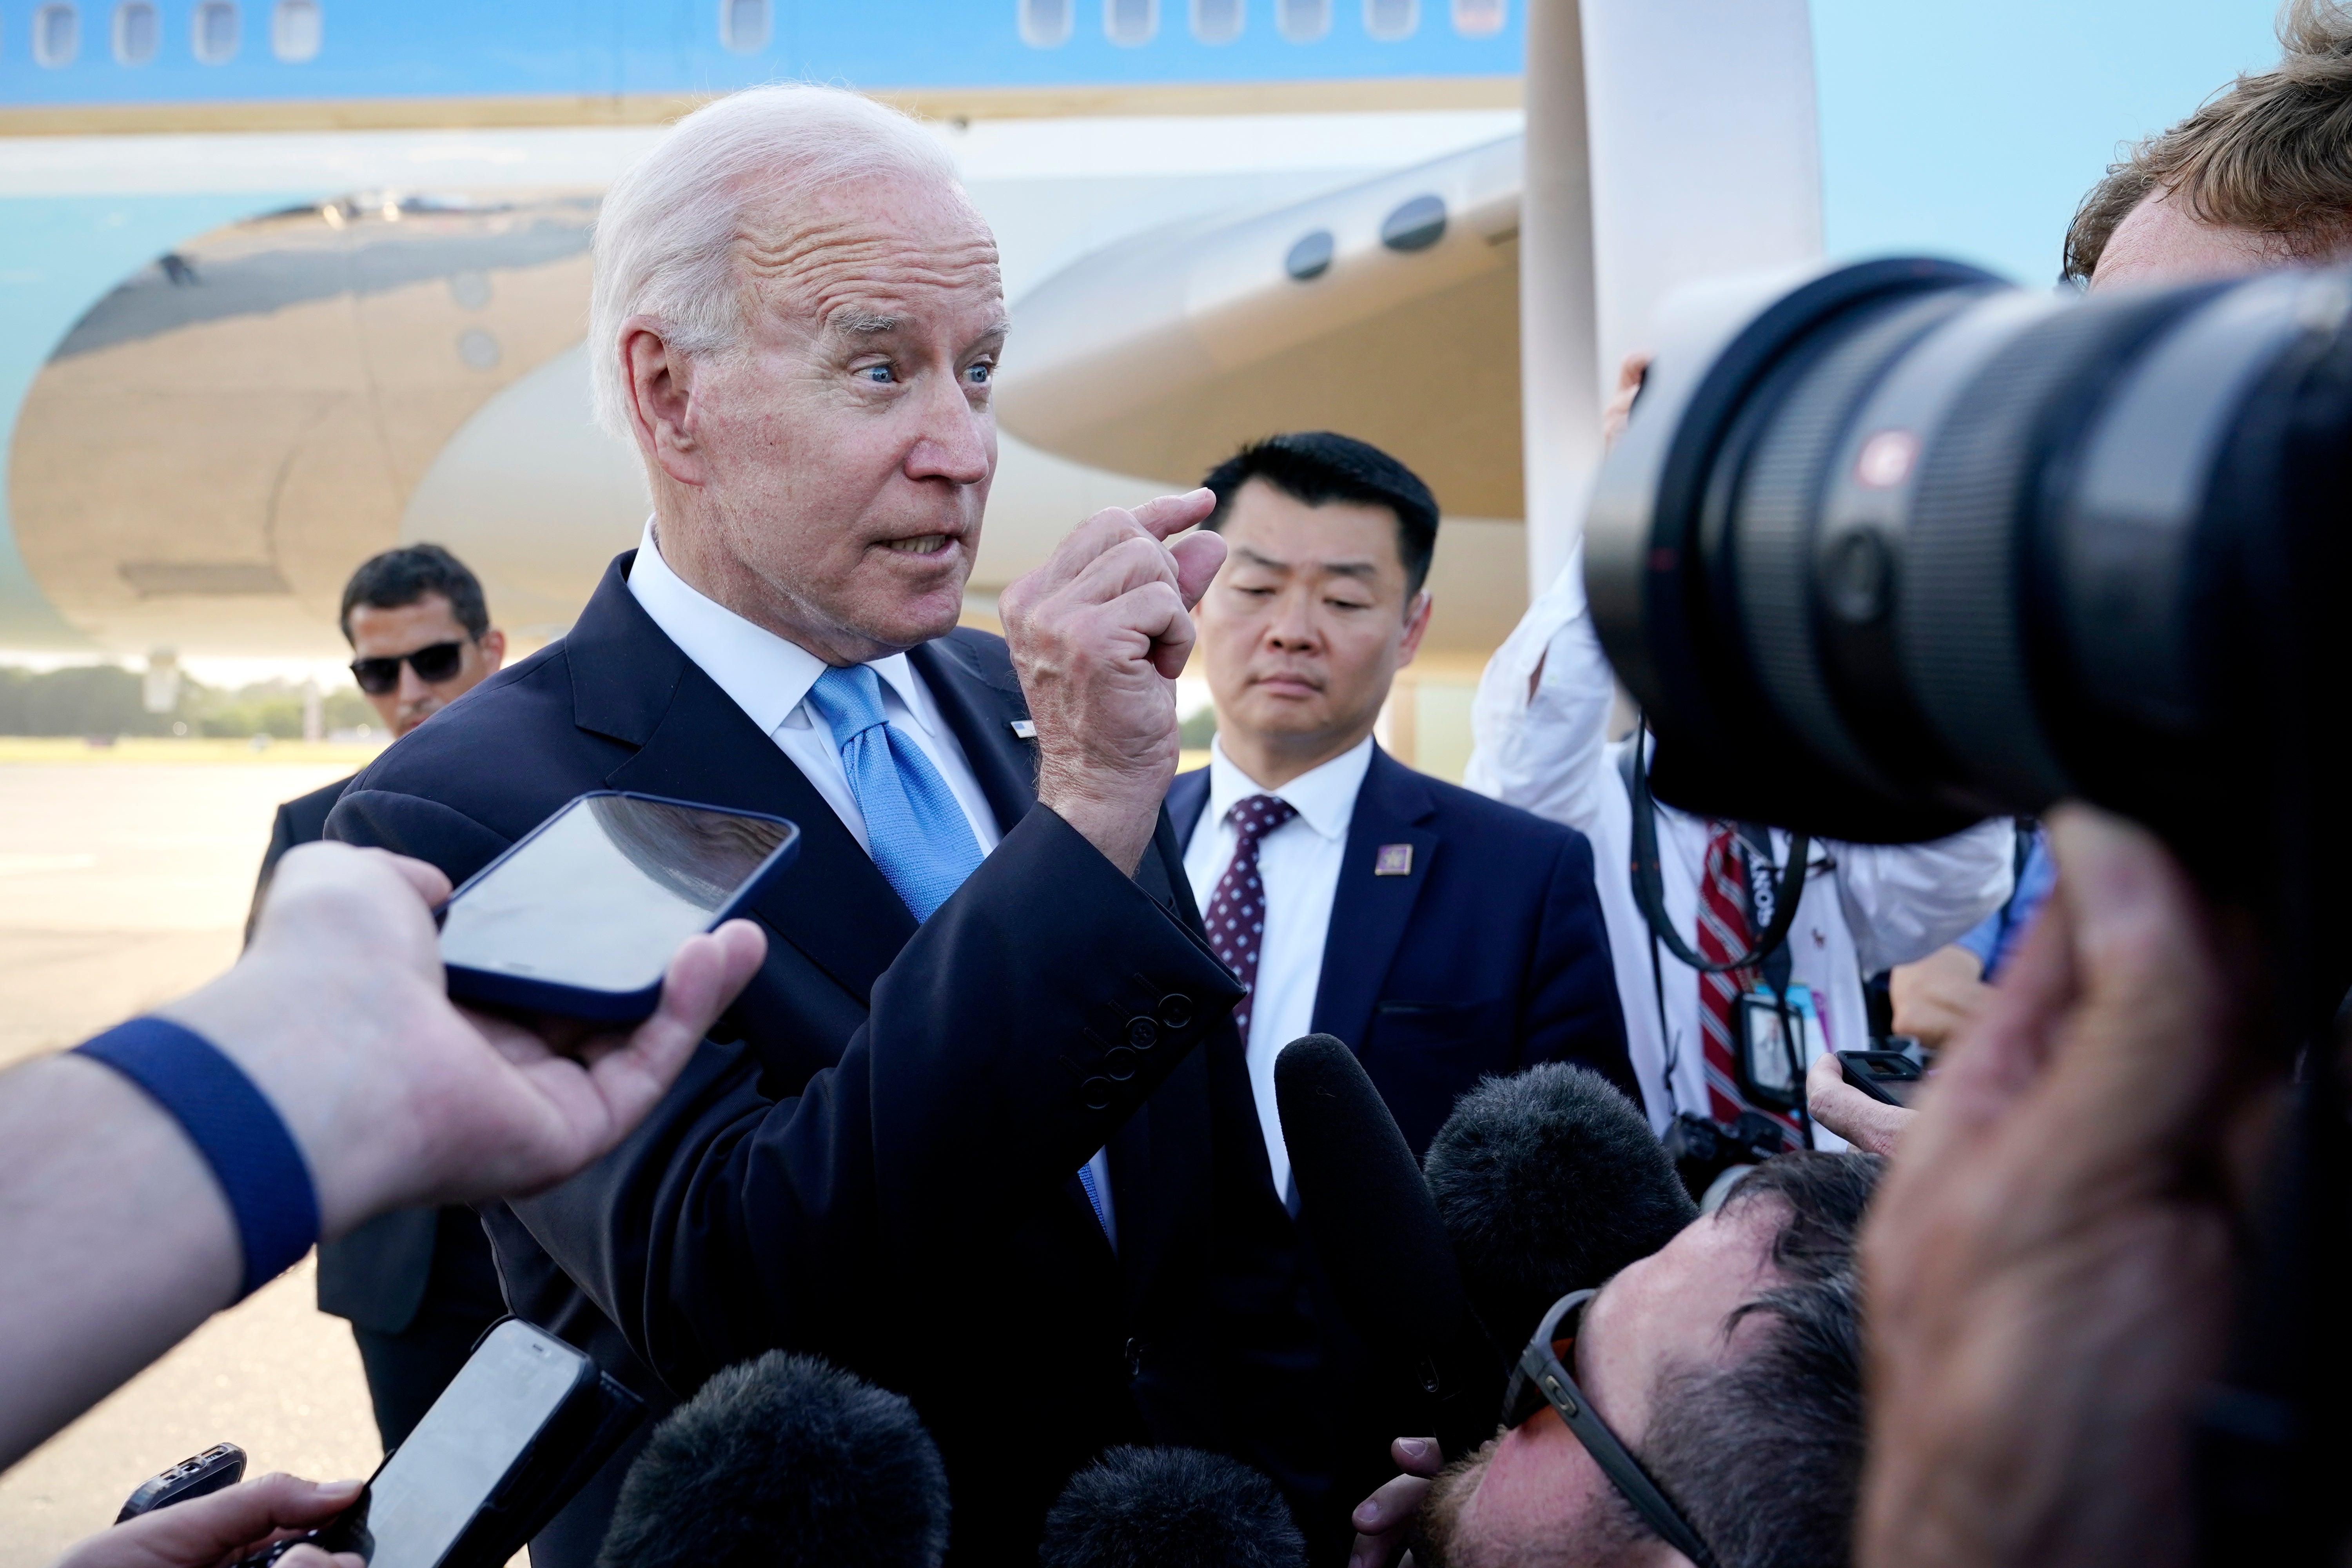 President Joe Biden speaks to reporters to apologise for his response to a question from CNN’s Kaitlan Collins